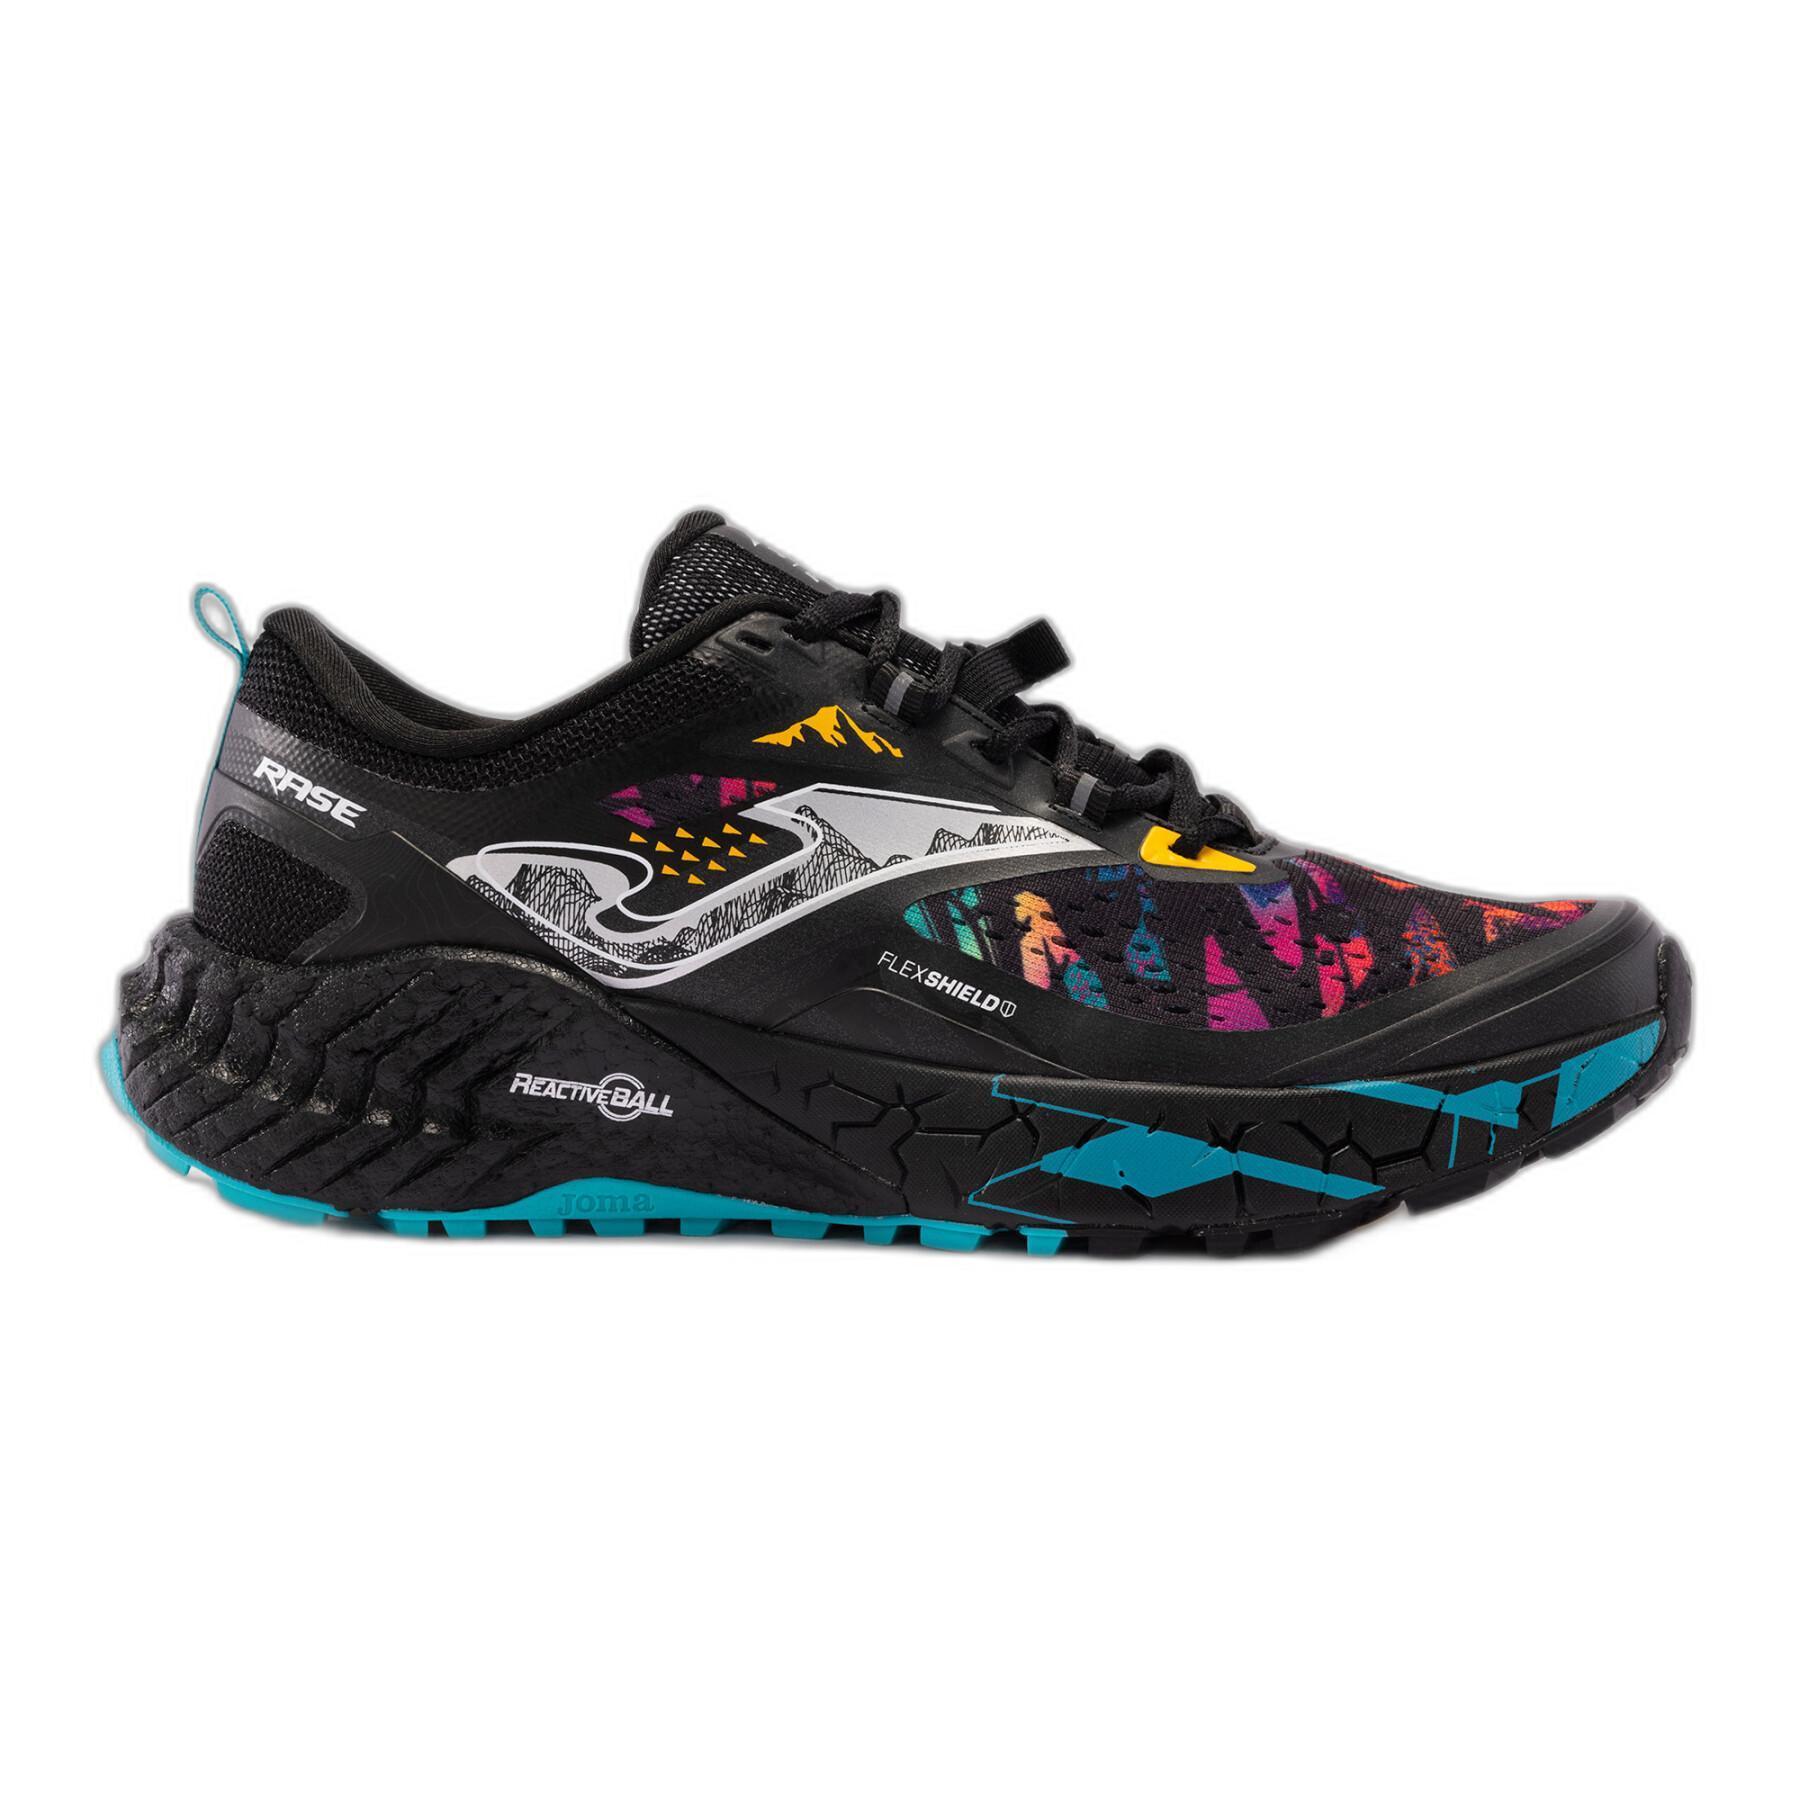 Trail shoes Joma Rase 2401